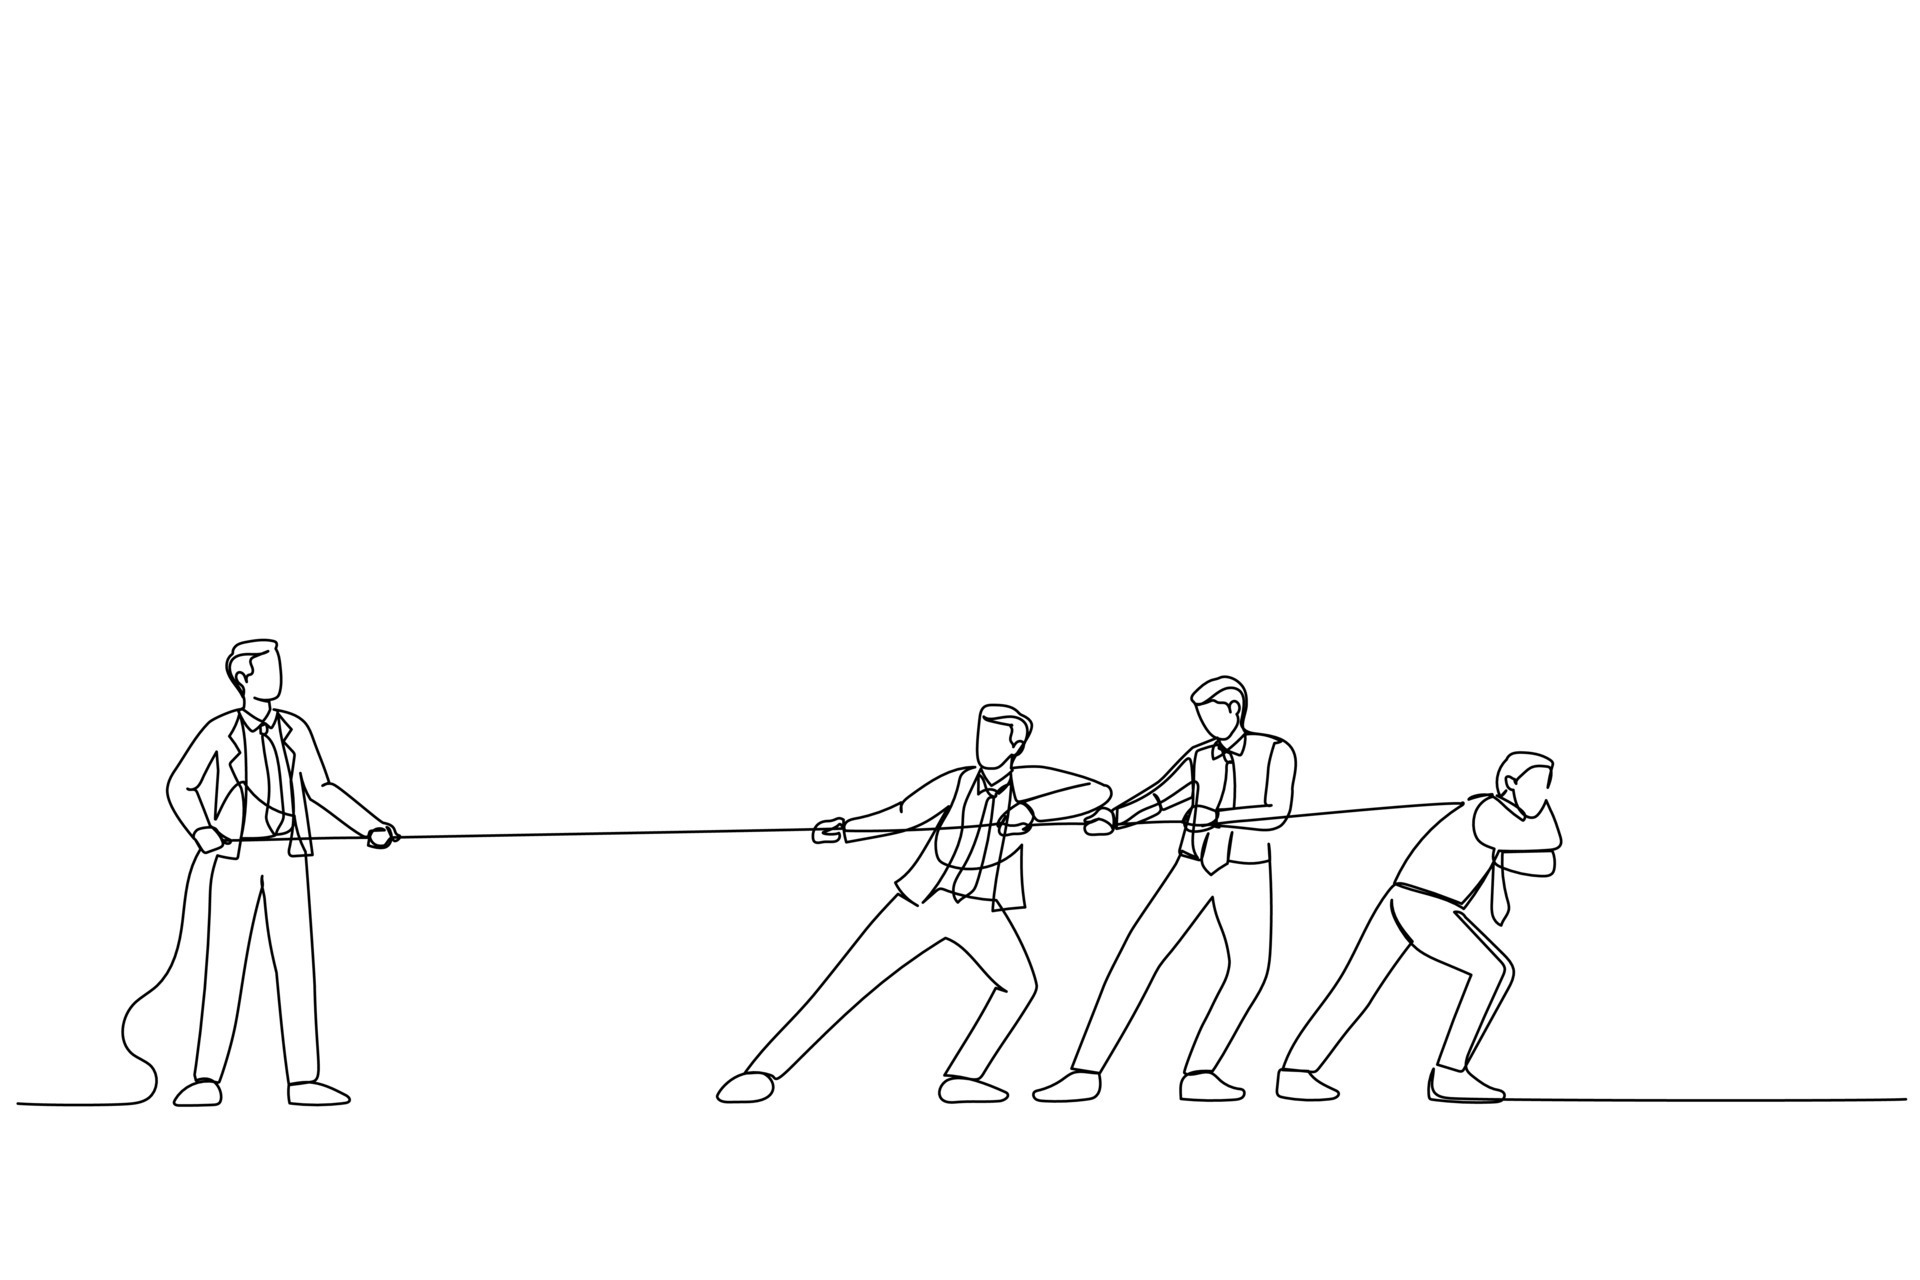 Cartoon of Business team pulling rope against successful